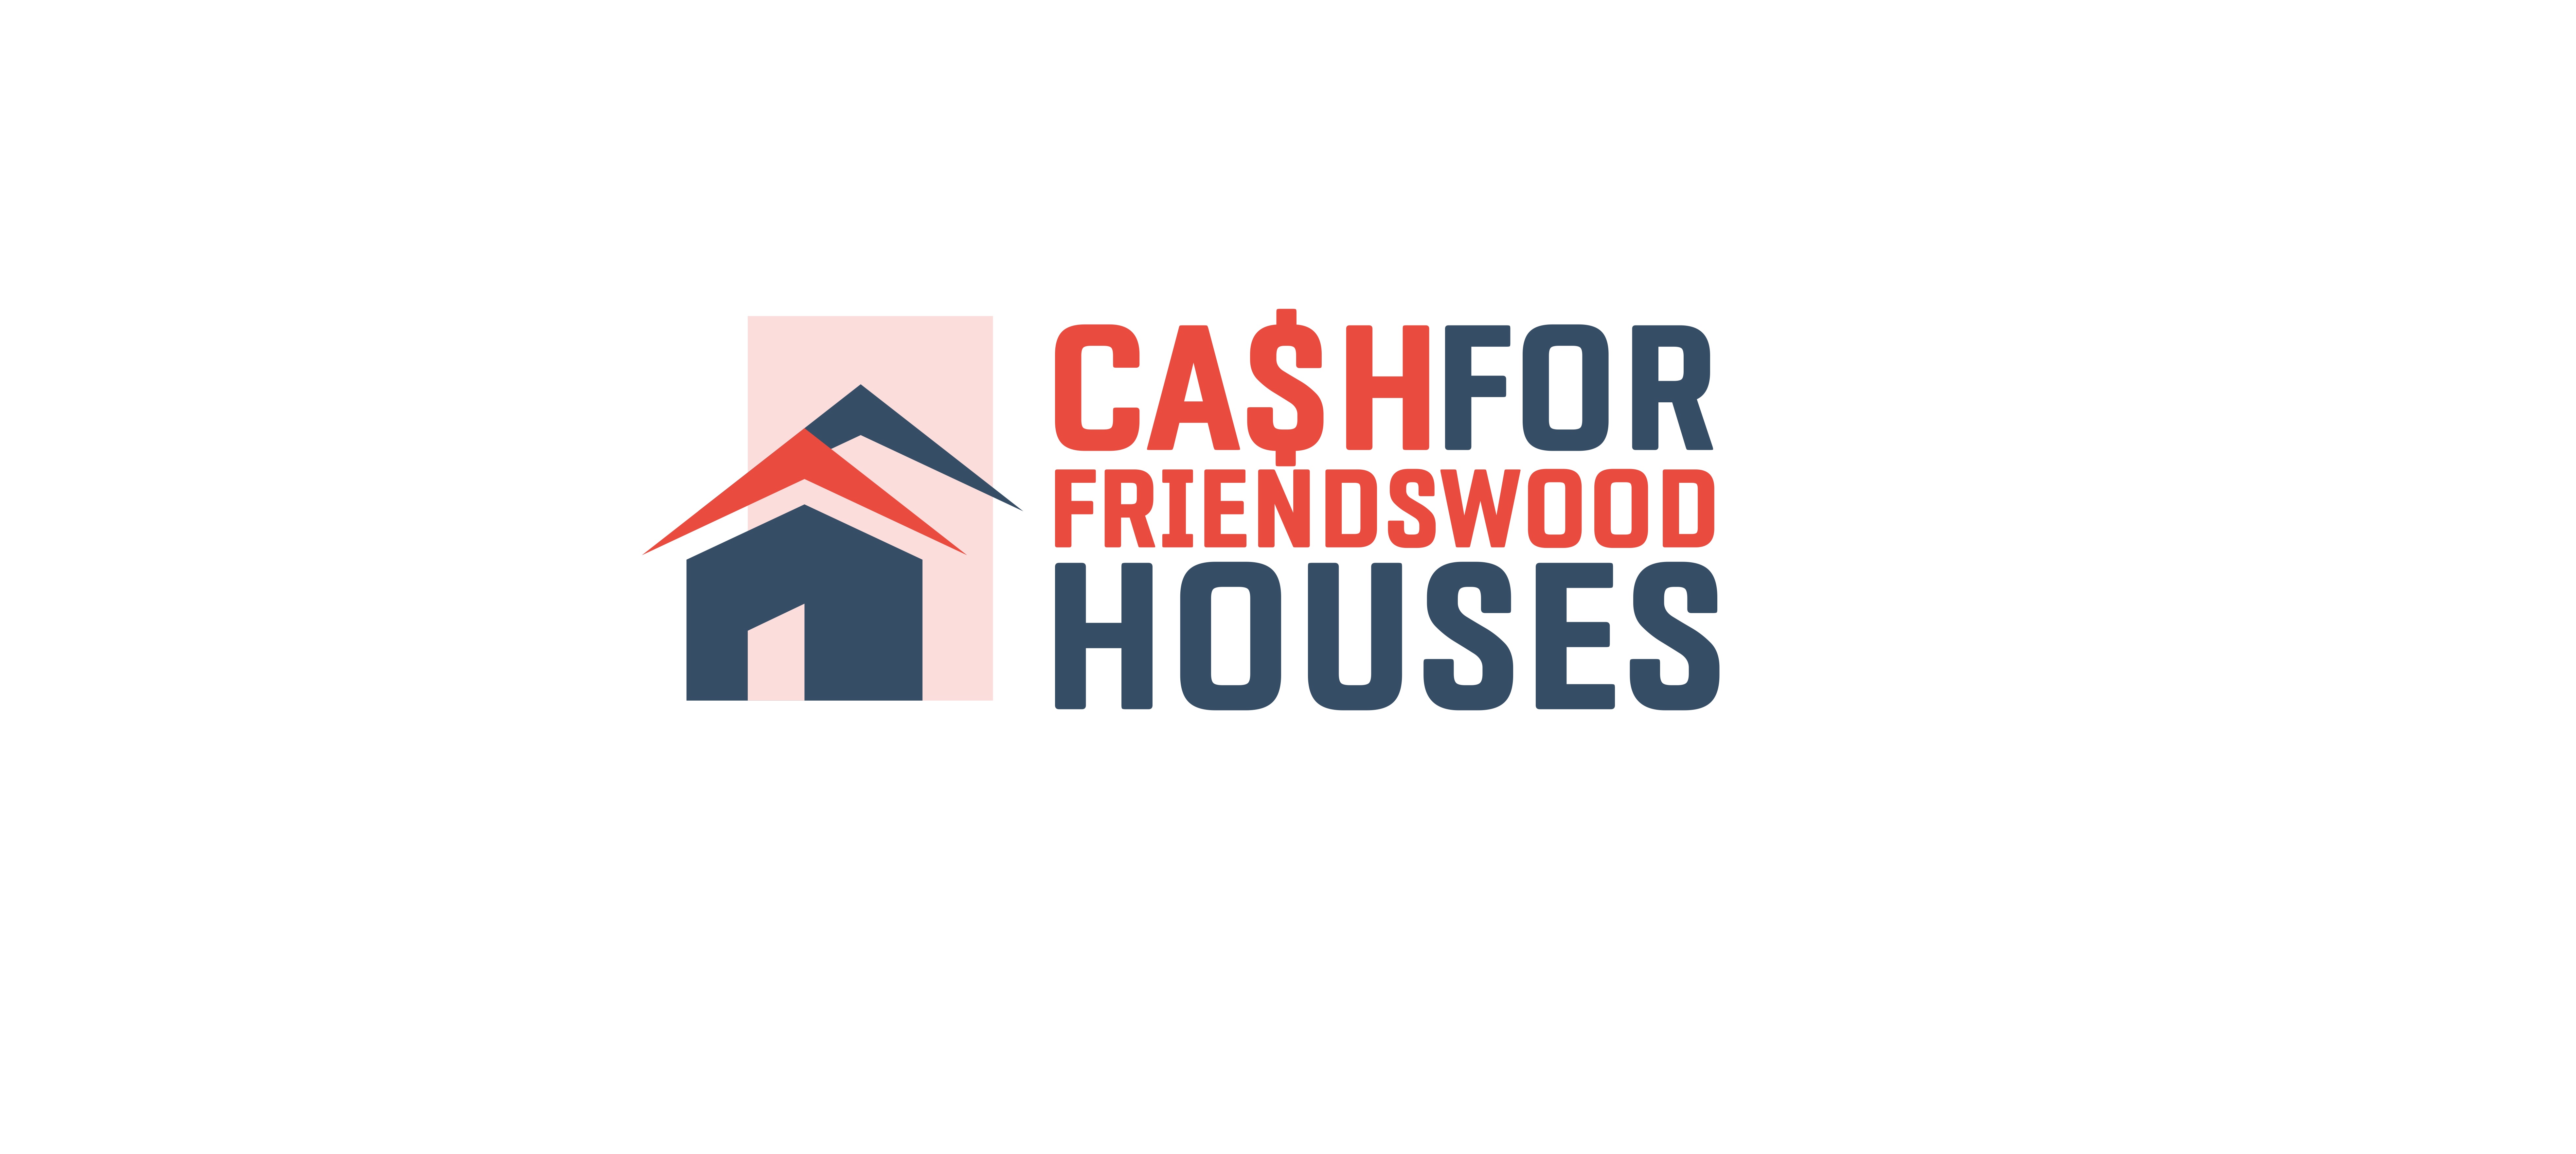 Cash for Friendswood Houses